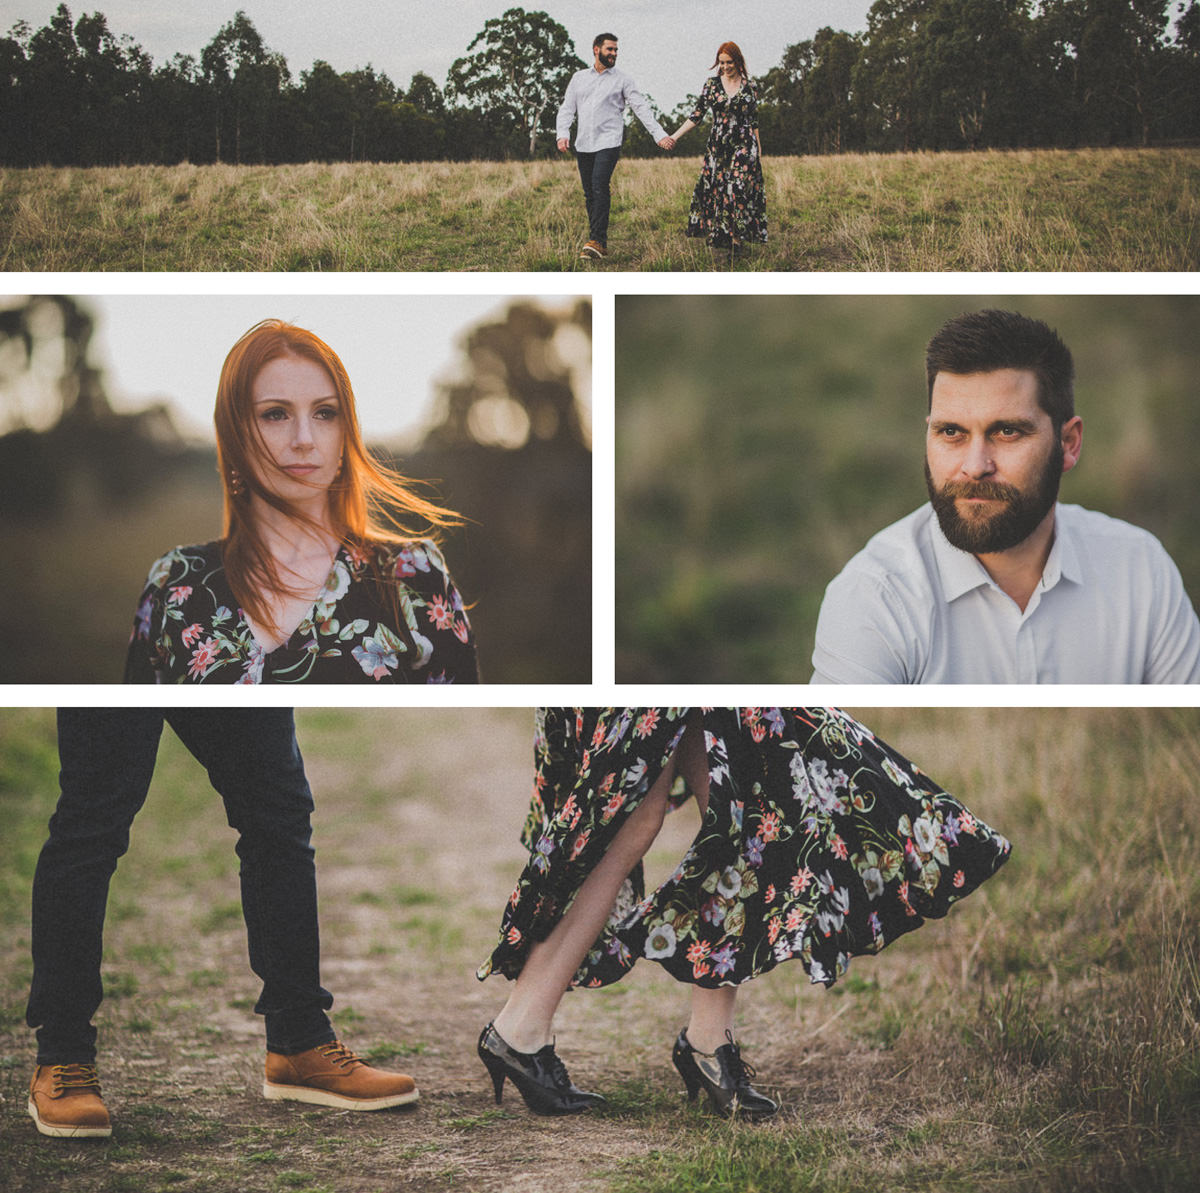 relaxed photographer in melbourne - no stress at weddings - fun and creative photography in Melbourne for couples , engagements and weddings